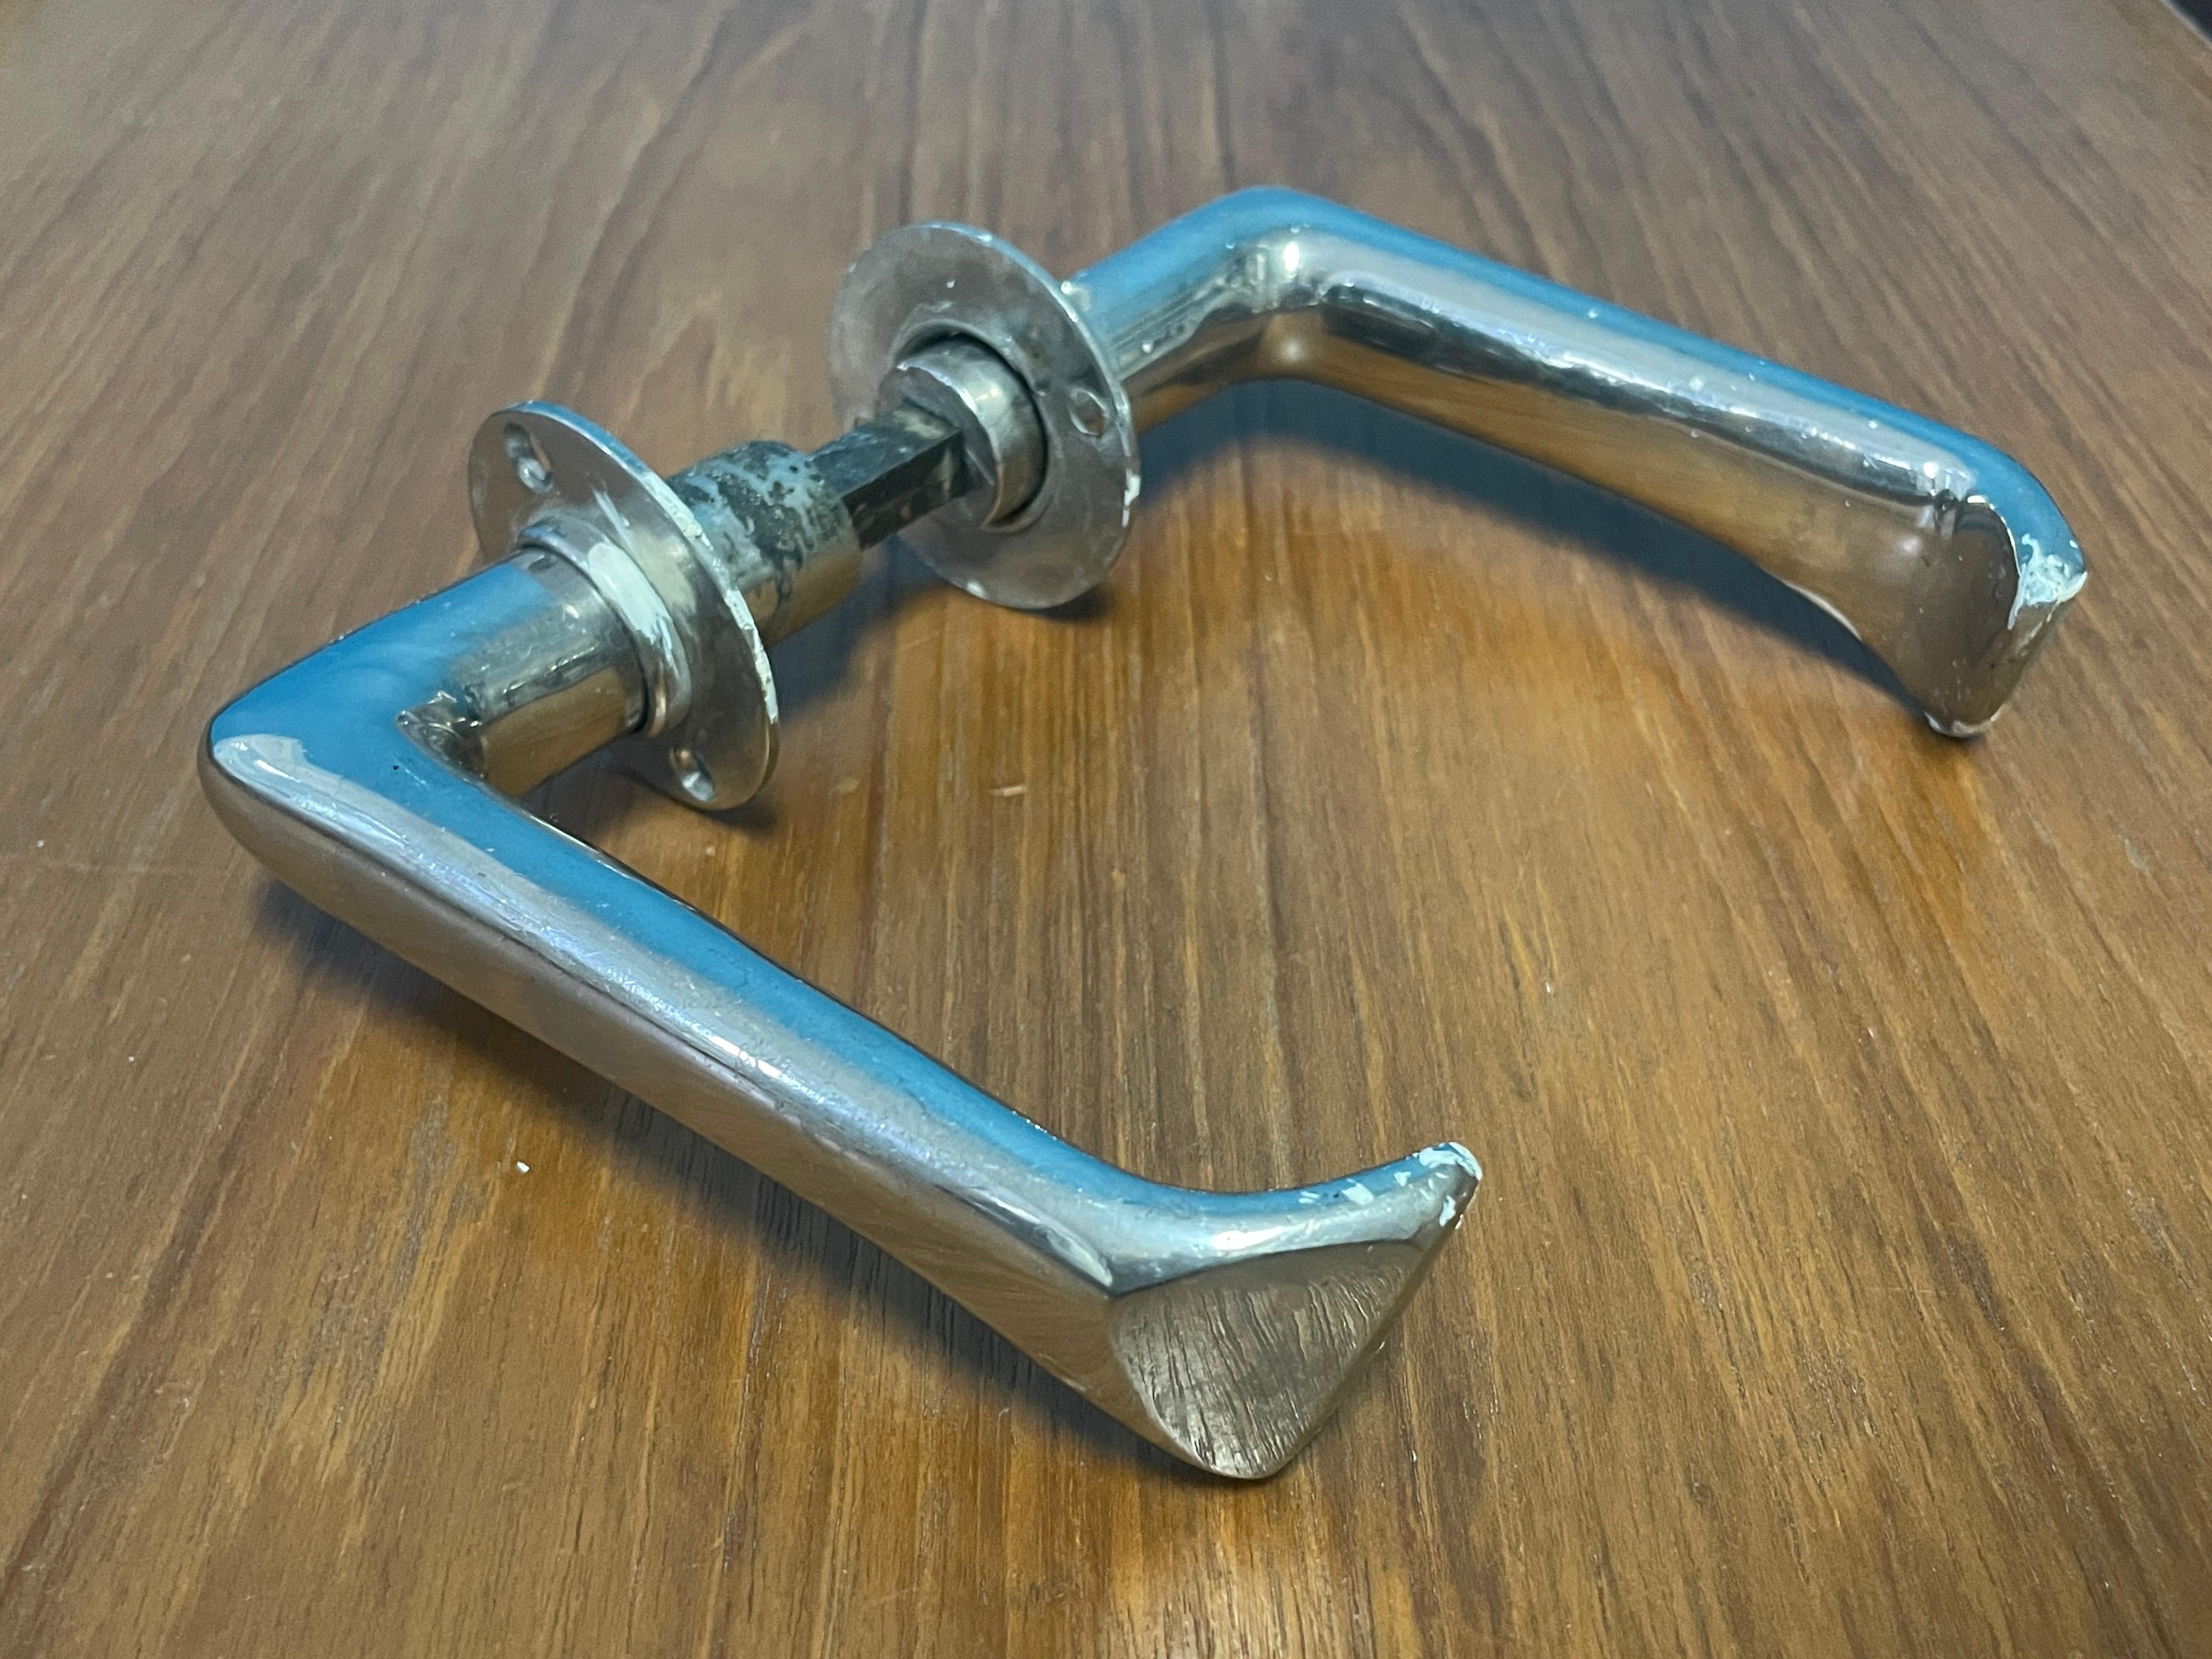 Sculptural Door Handles designed by Alvar Aalto in 1950s. Made in Finland.

Materials: Nickel-plated Brass.

Includes two handles and spacer. No screws.

Rarely for sale.